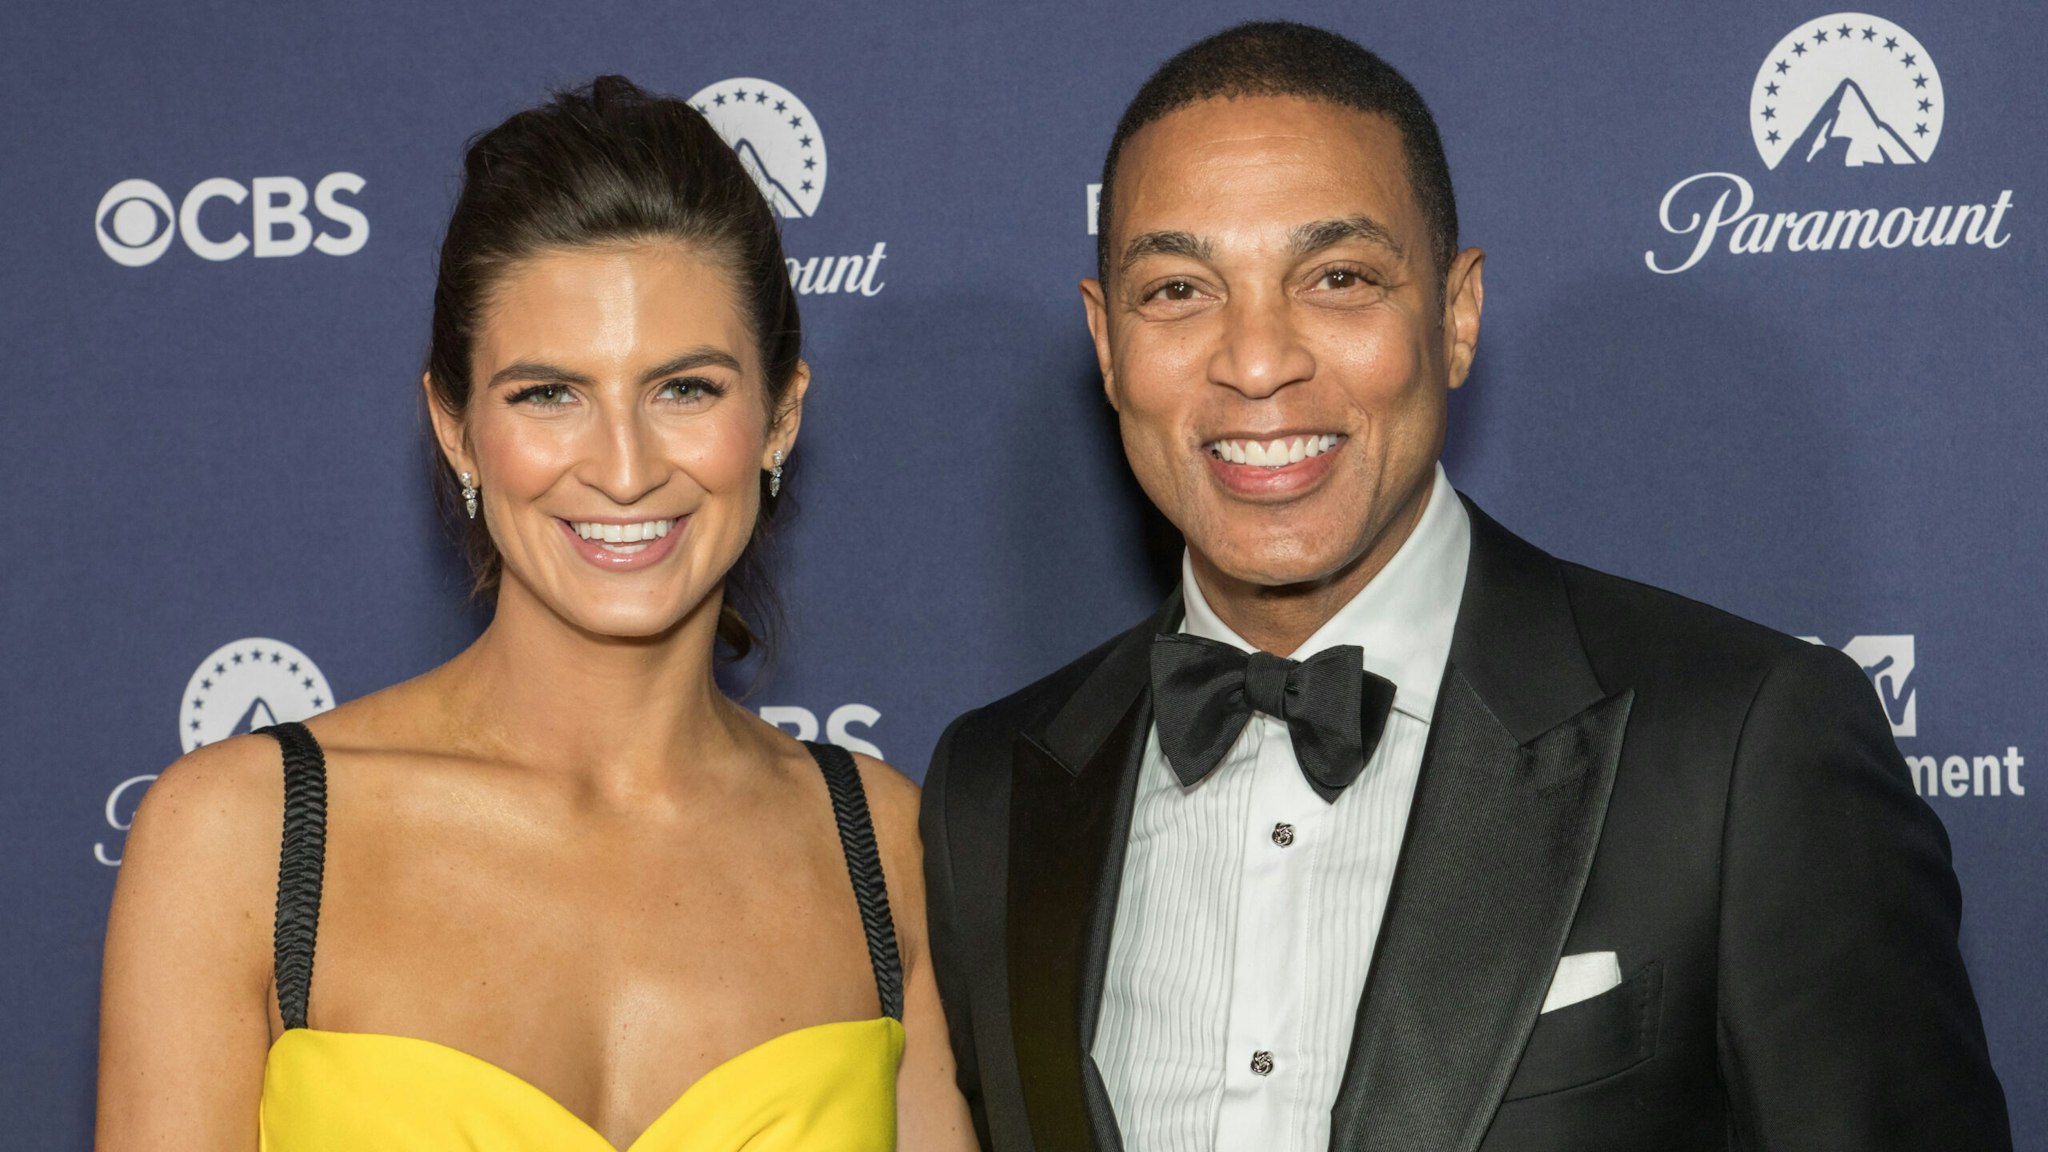 WASHINGTON, DC - APRIL 30: (L-R) Kaitlan Collins and Don Lemon attend Paramount’s White House Correspondents’ Dinner after party at the Residence of the French Ambassador on April 30, 2022 in Washington, DC.